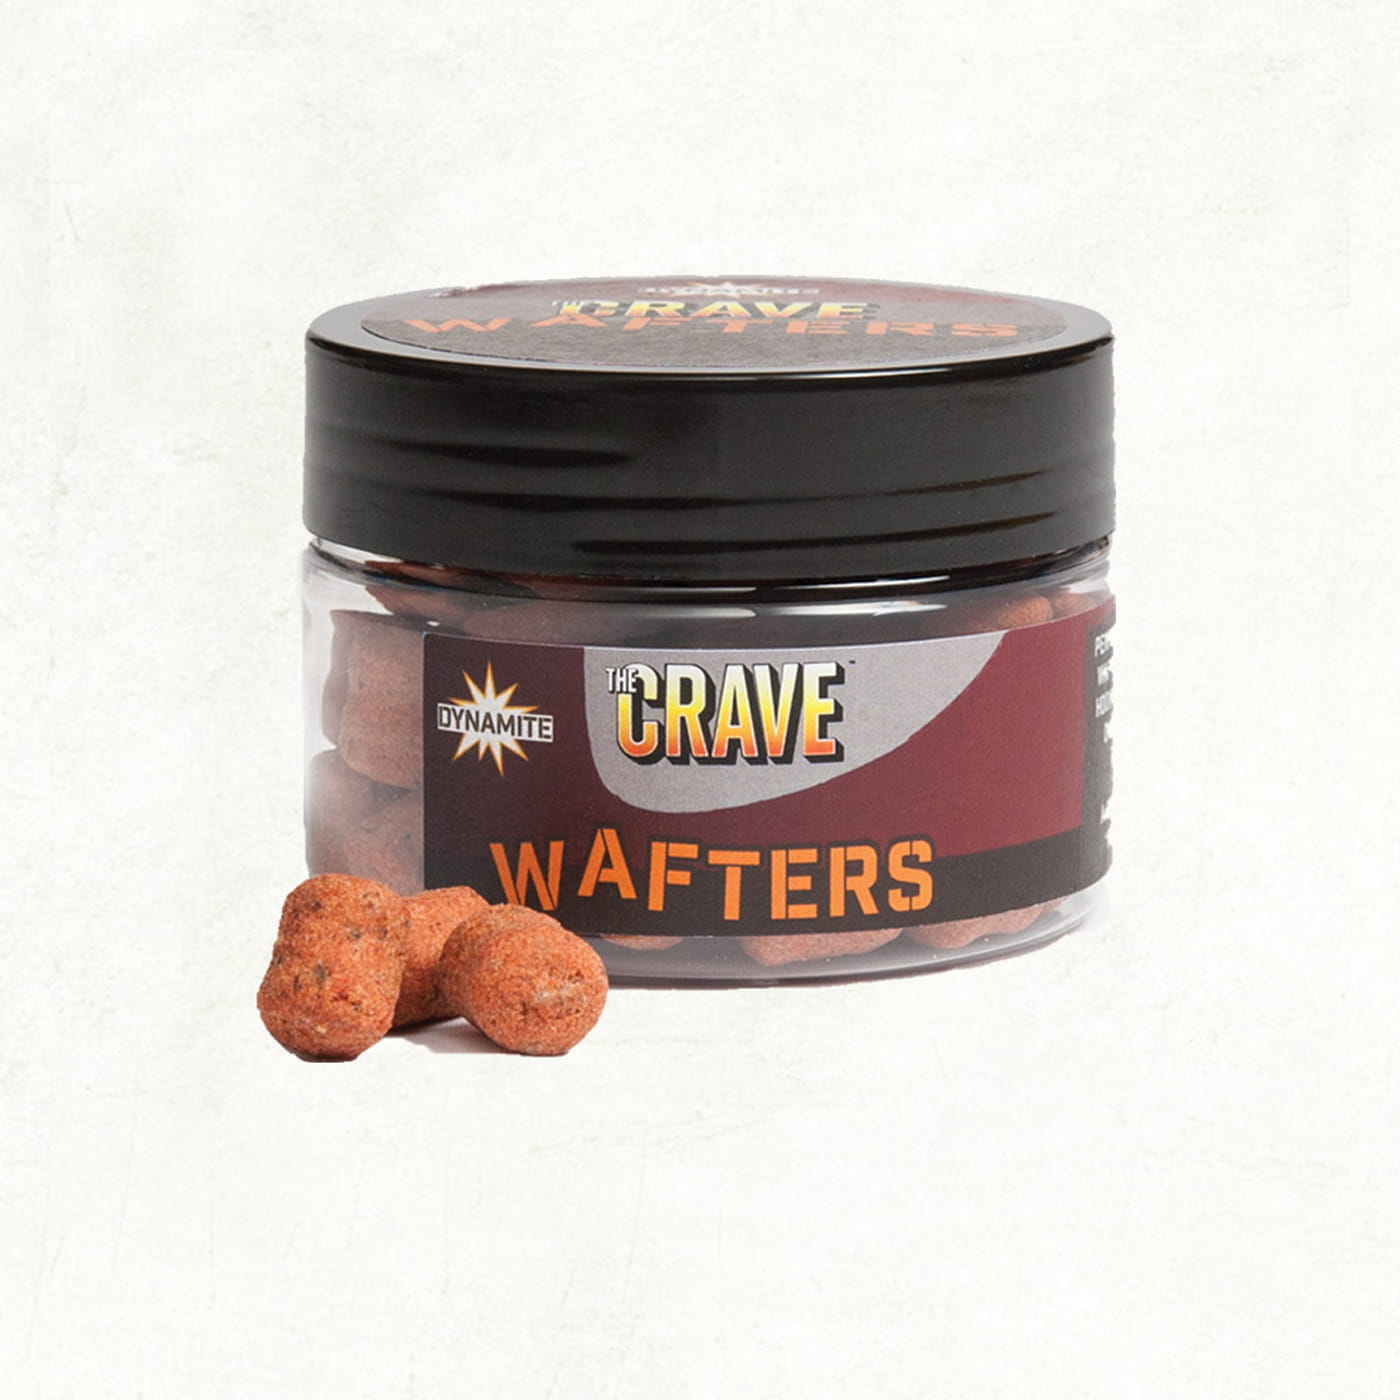 The Crave Wafters